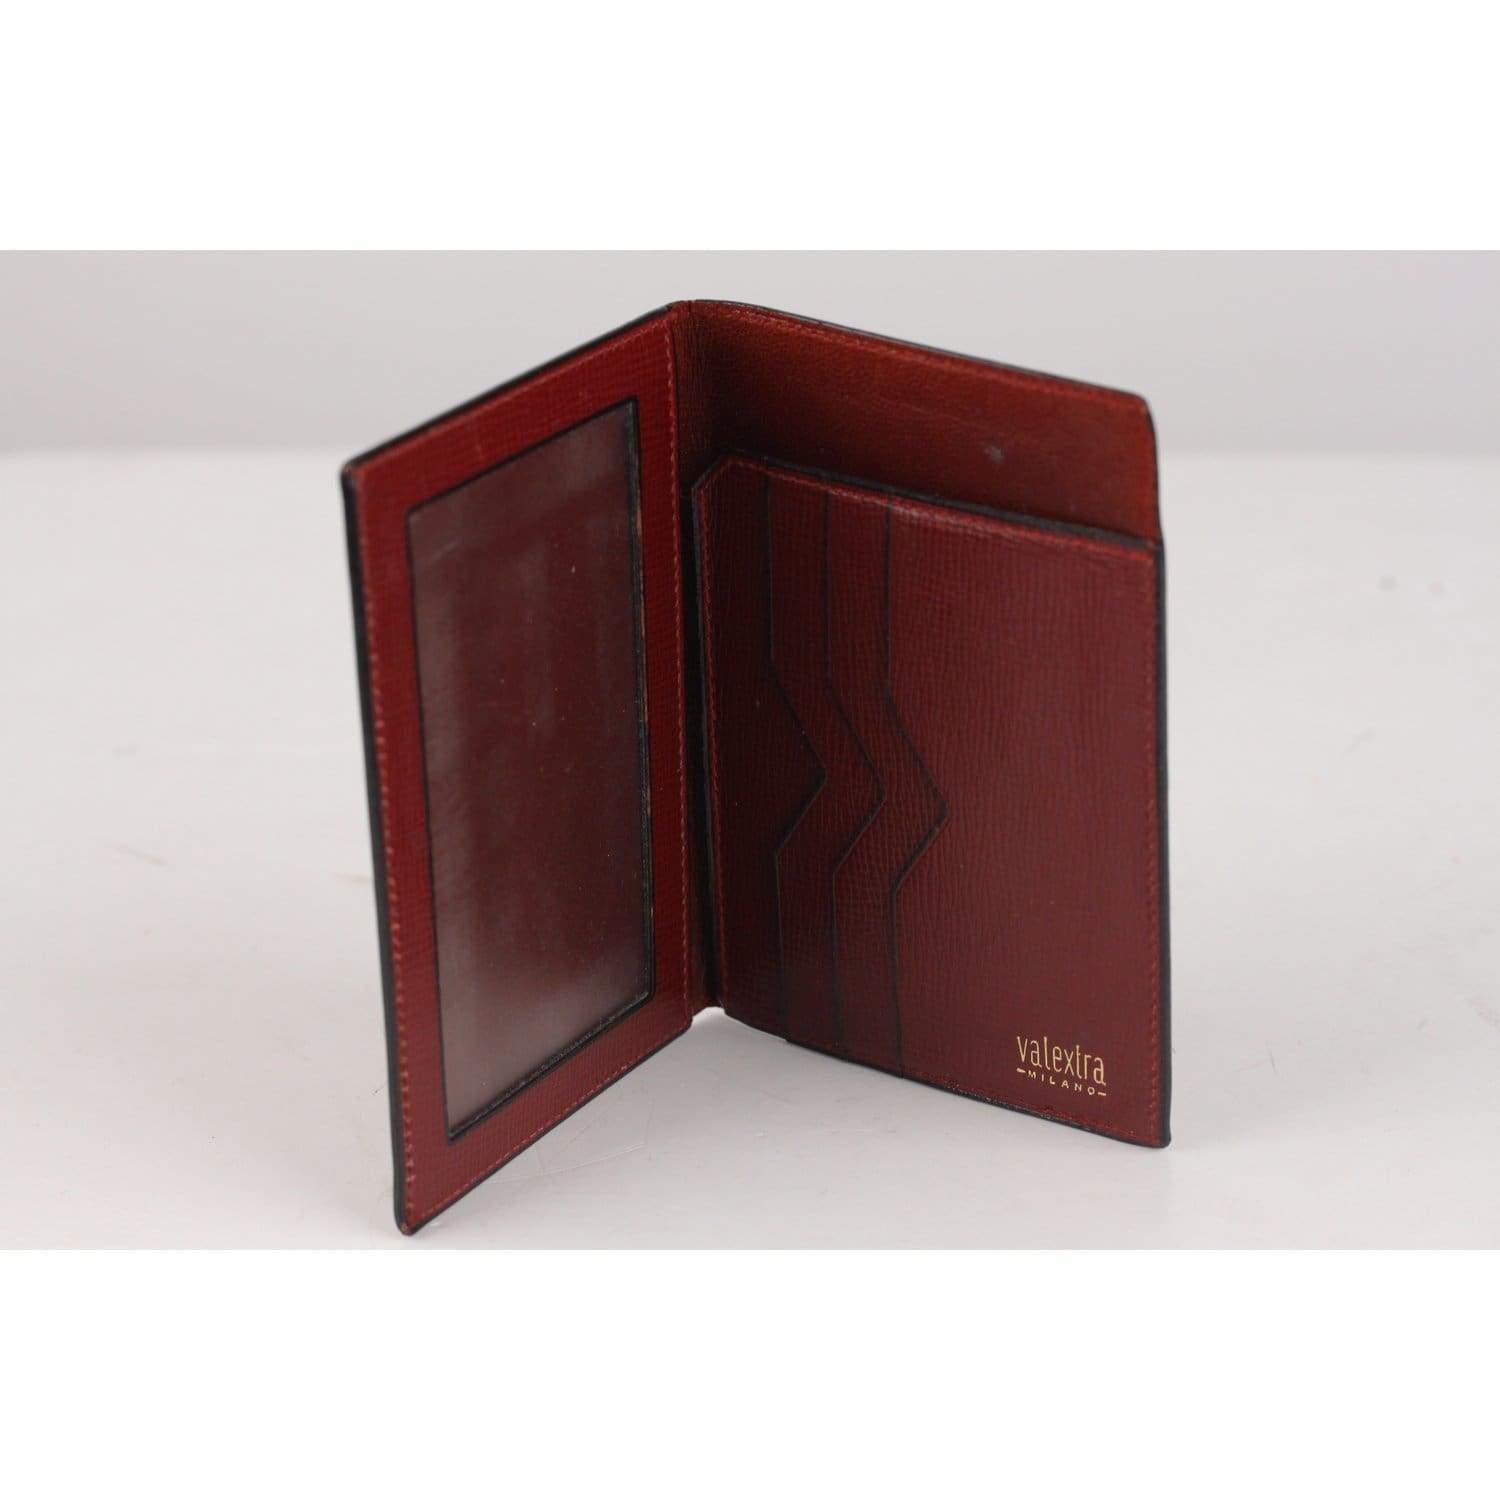 MATERIAL: Leather COLOR: Burgundy MODEL: Wallet GENDER: Men, Woimen SIZE: Condition CONDITION DETAILS: A :EXCELLENT CONDITION - Used once or twice. Looks mint. Imperceptible signs of wear - a couple of light creases on leather due to normal use